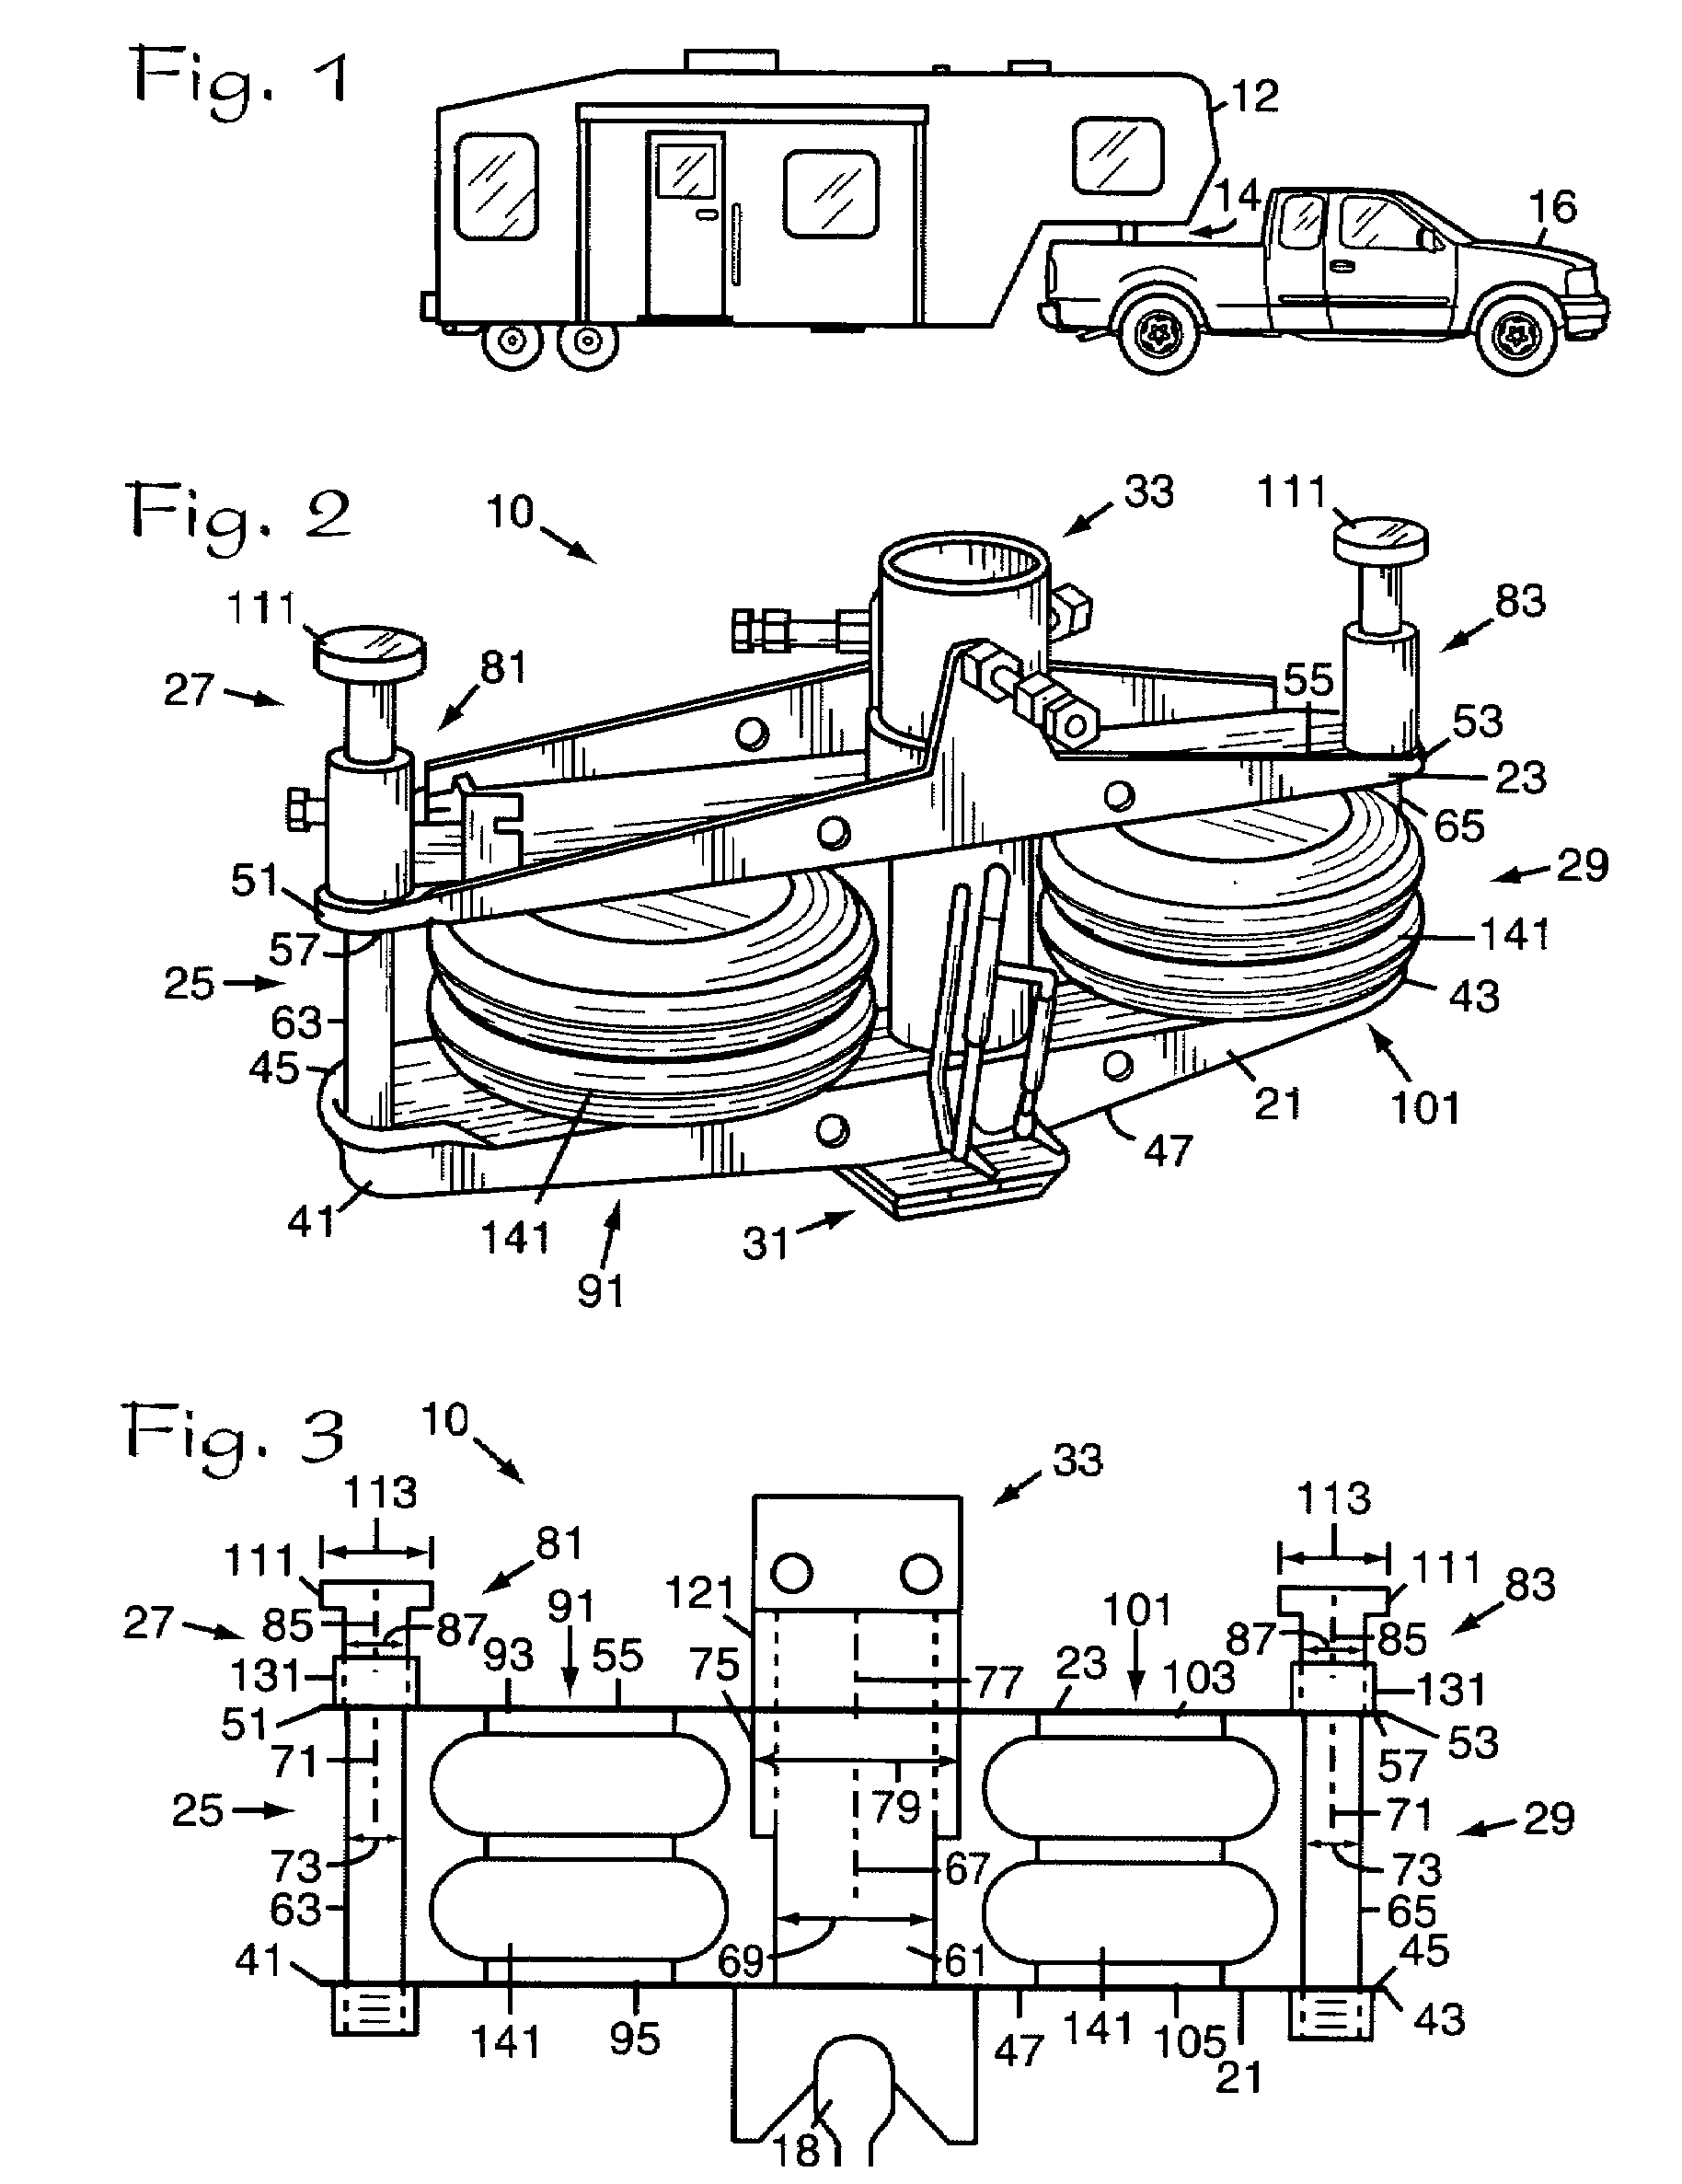 Shock-absorbing adapter for connecting fifth wheel or gooseneck trailer to towing vehicle